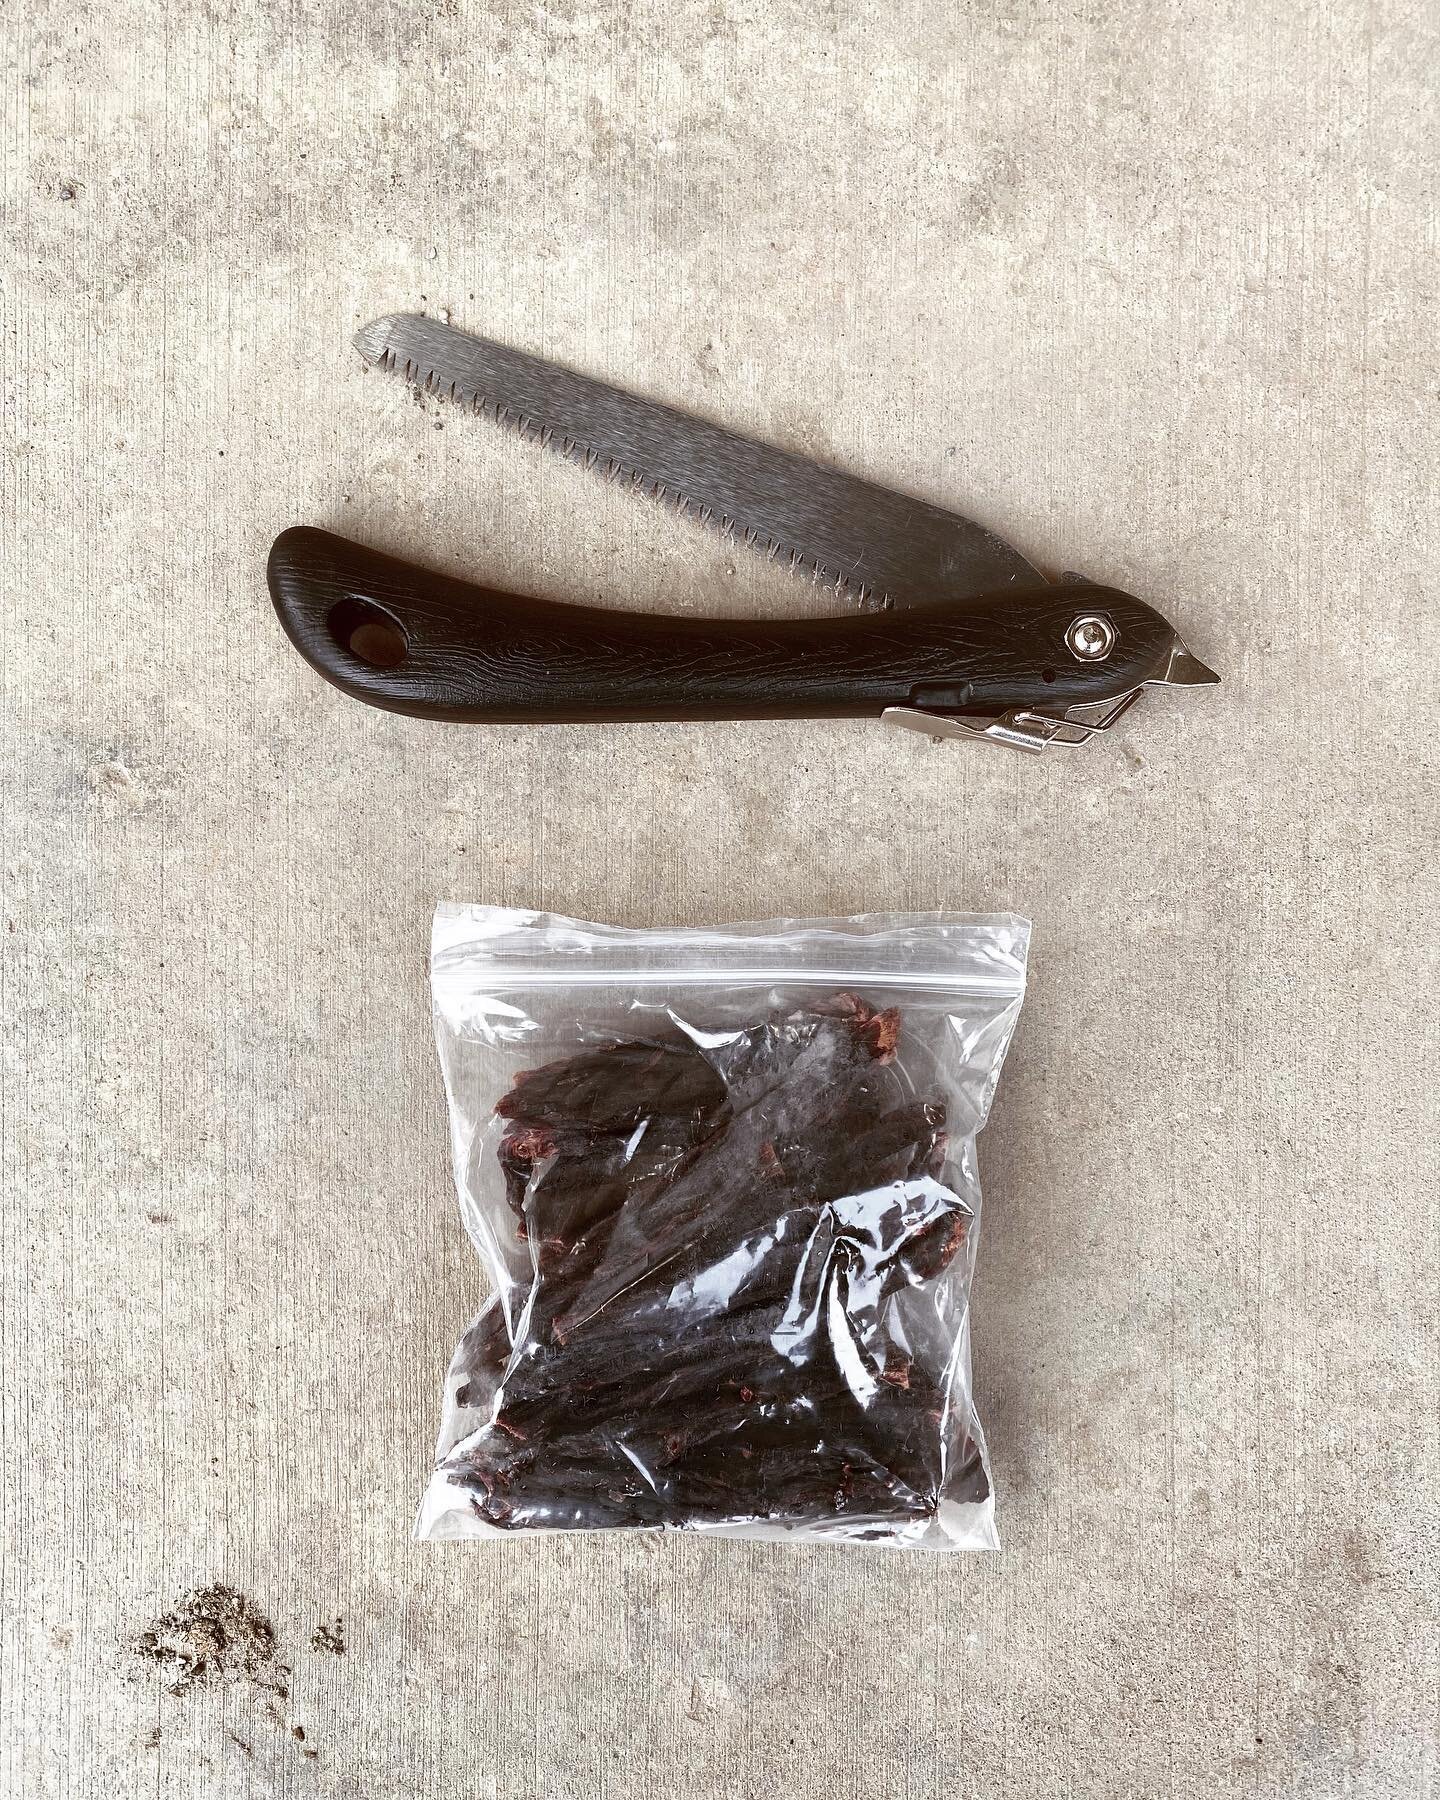 Gifts before the wilderness&mdash;paniktak, or moose jerky, and a folding saw. Today I head out to Onion Portage in Kobuk Valley National Park, and along the way it&rsquo;s small gifts like this &mdash; practical, beautiful things &mdash; from people